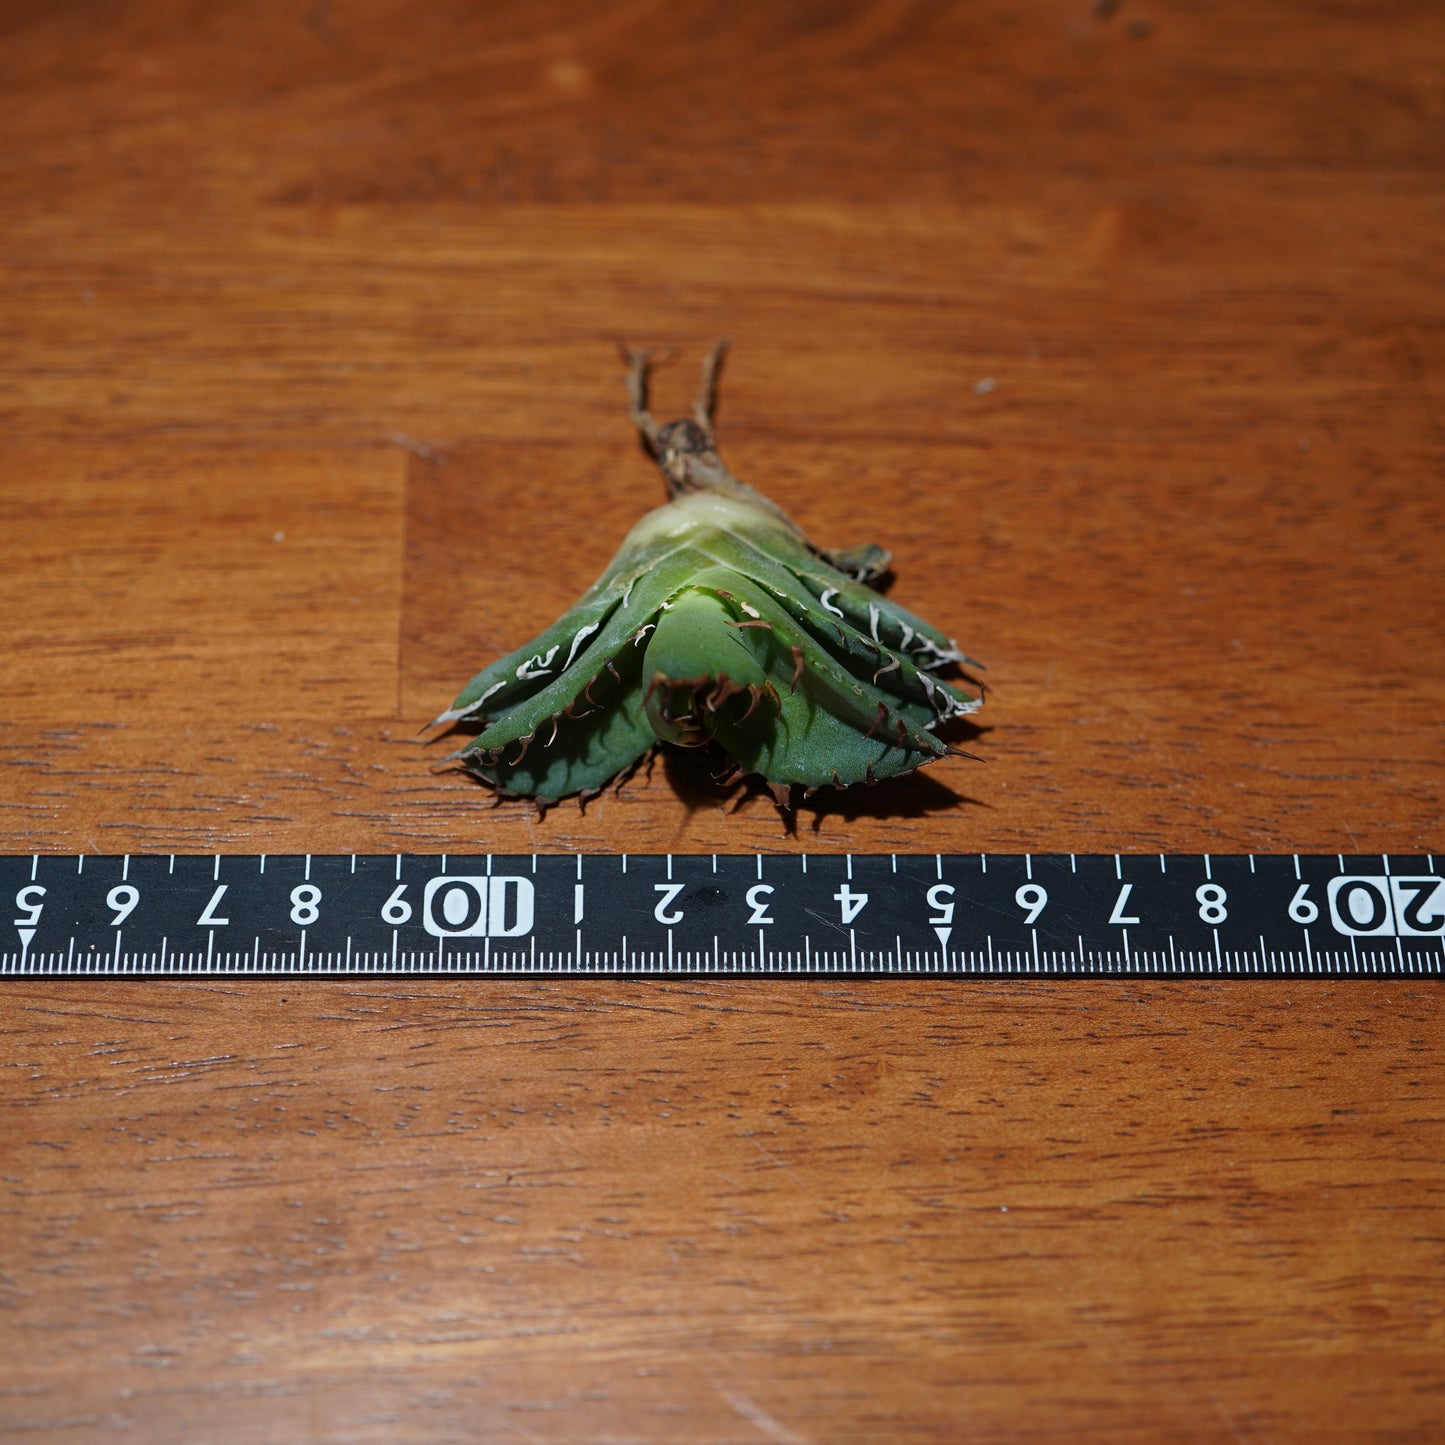 【From lize gardening】Agave titanota ’Crab(螃蟹)’ Baby No.2